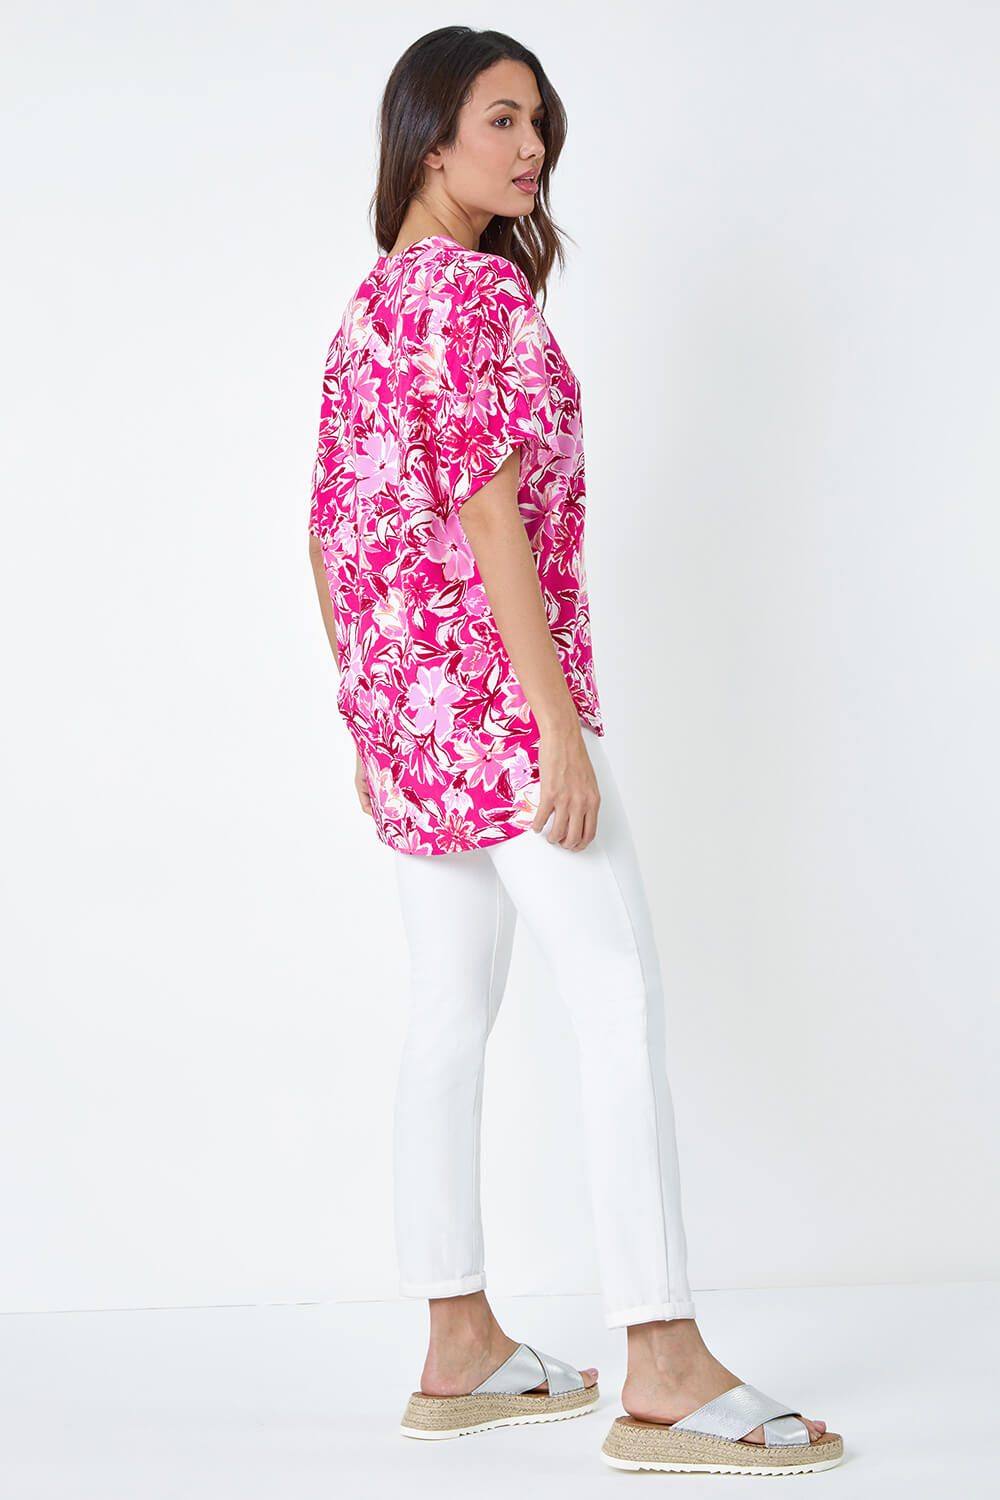 PINK Floral Print Pleat Front Overshirt, Image 3 of 5